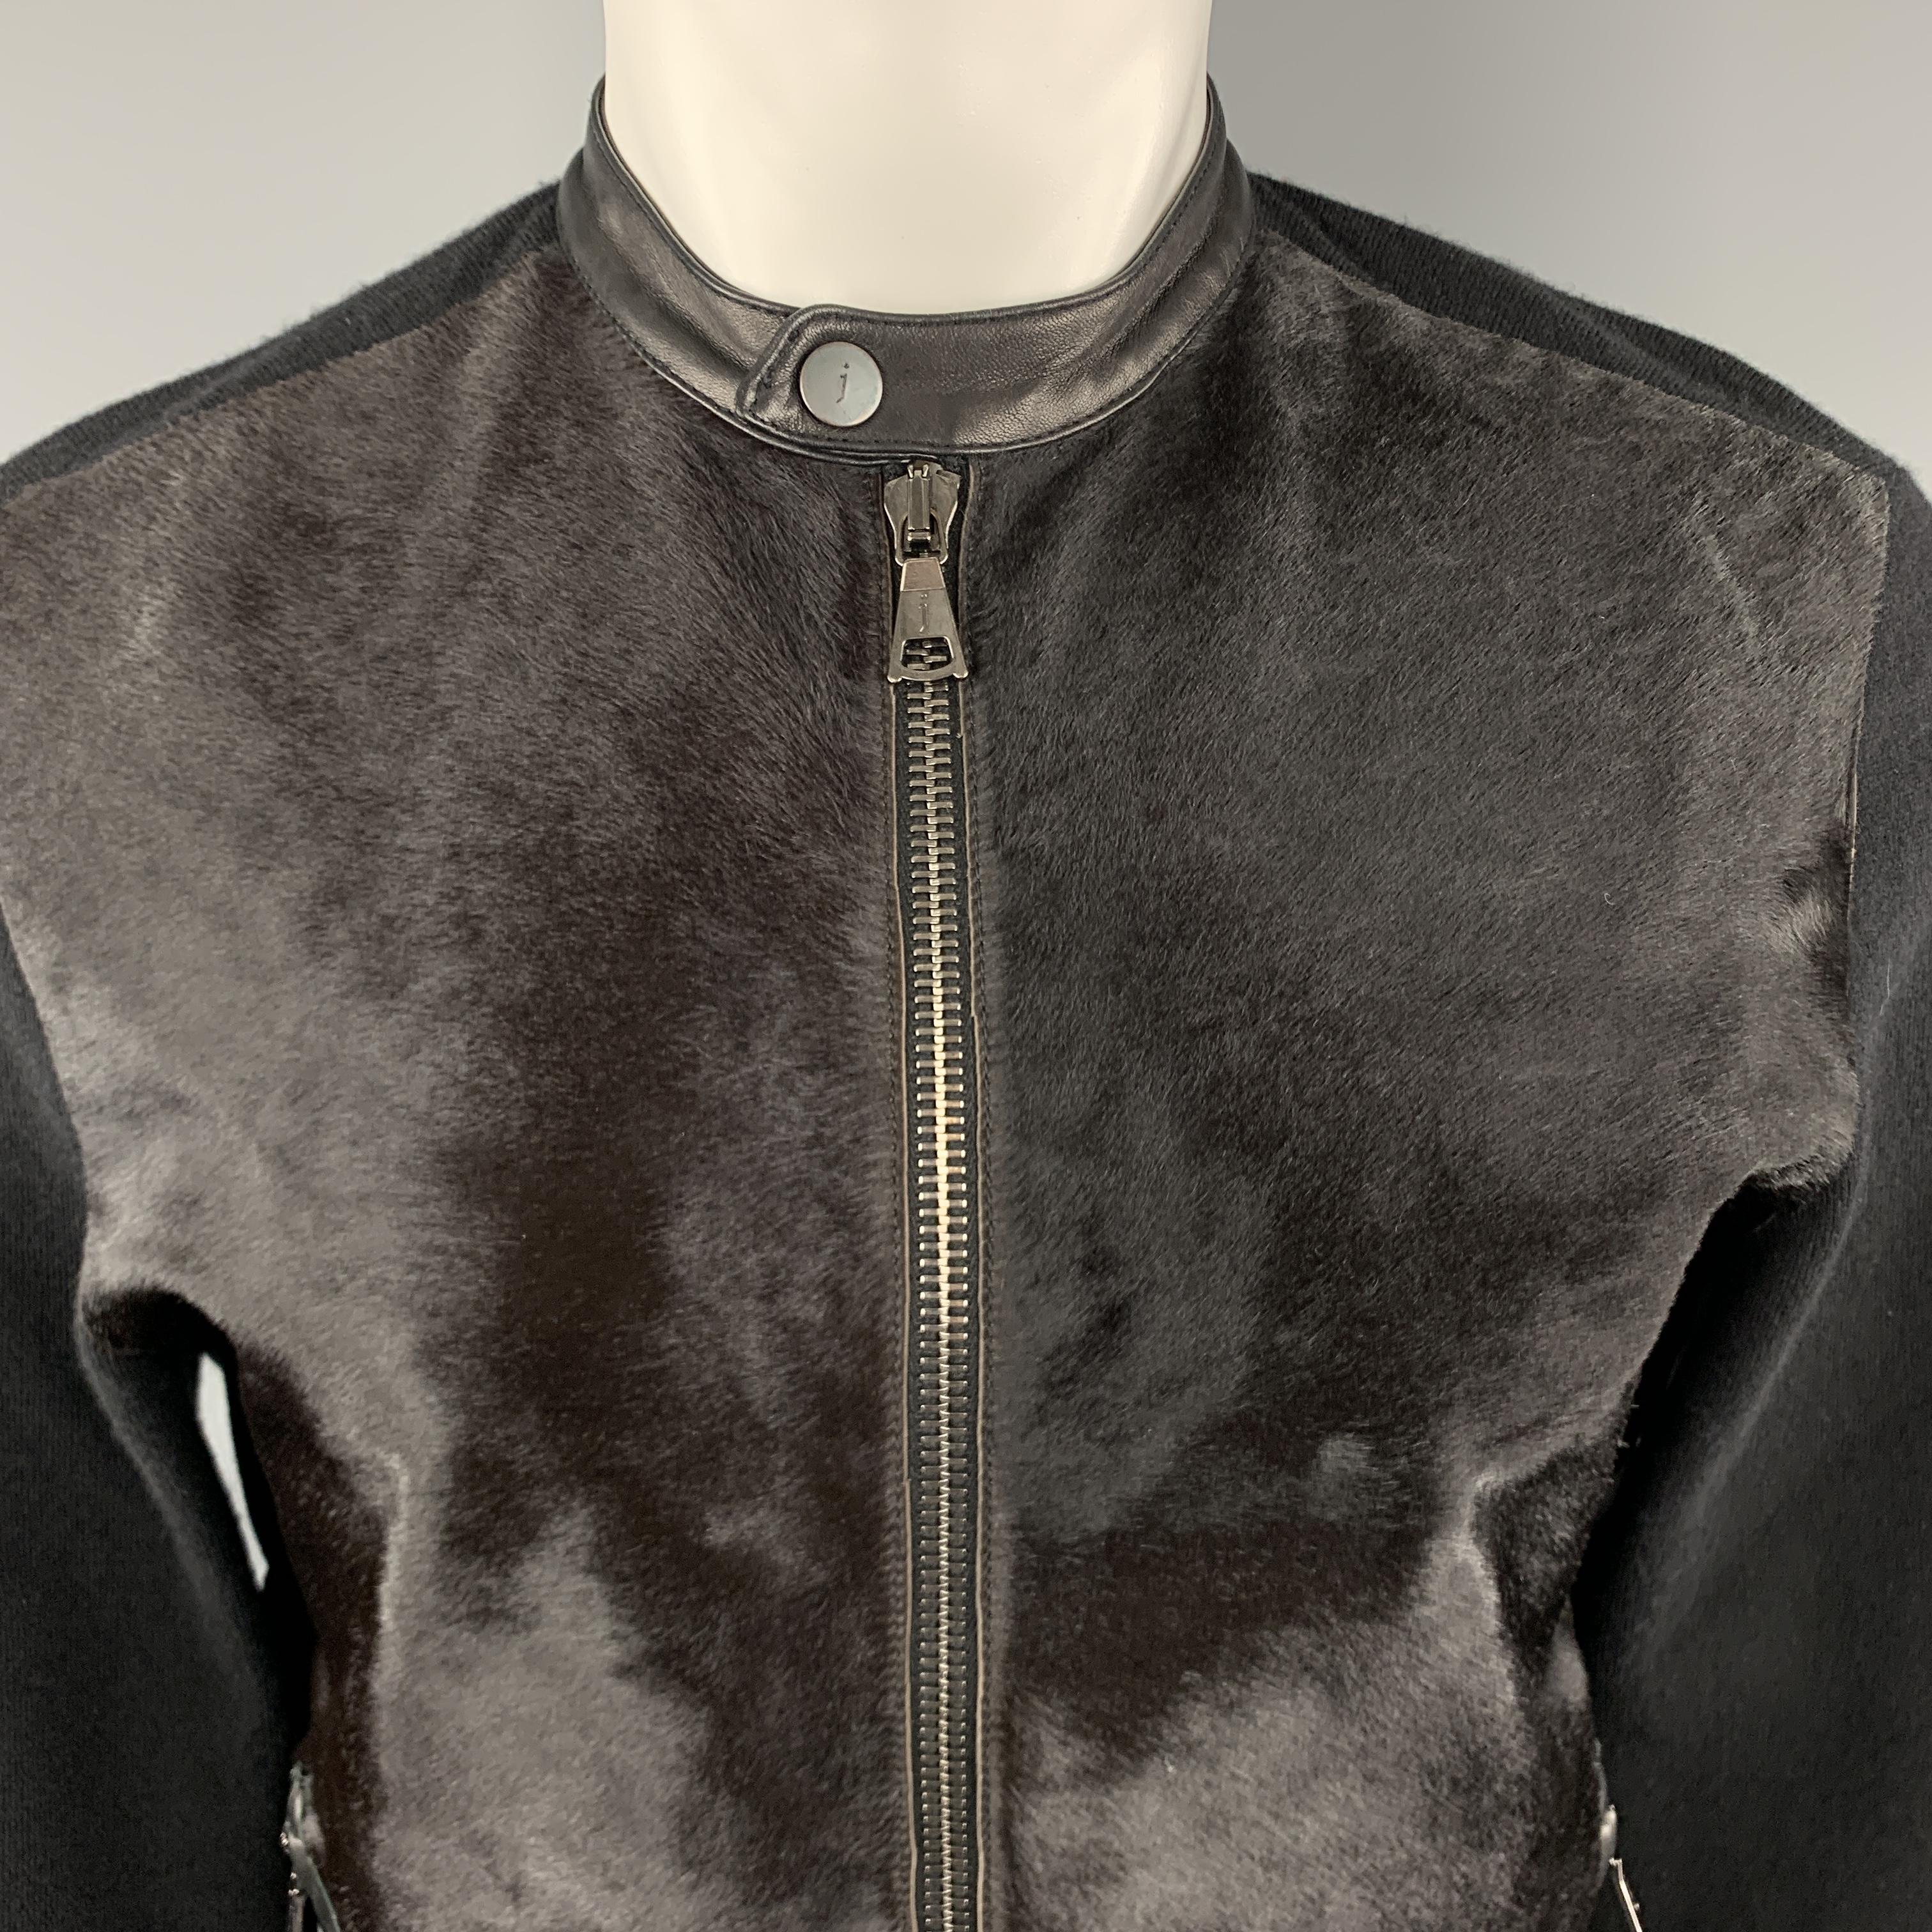 JOHN VARVATOS jacket comes in a stretch cashmere blend knit with a ponyhair leather frontal panel, zip pockets, and leather snap biker jacket collar. 

Excellent Pre-Owned Condition.
Marked: M

Measurements:

Shoulder: 16.5 in.
Chest: 42 in.
Sleeve: